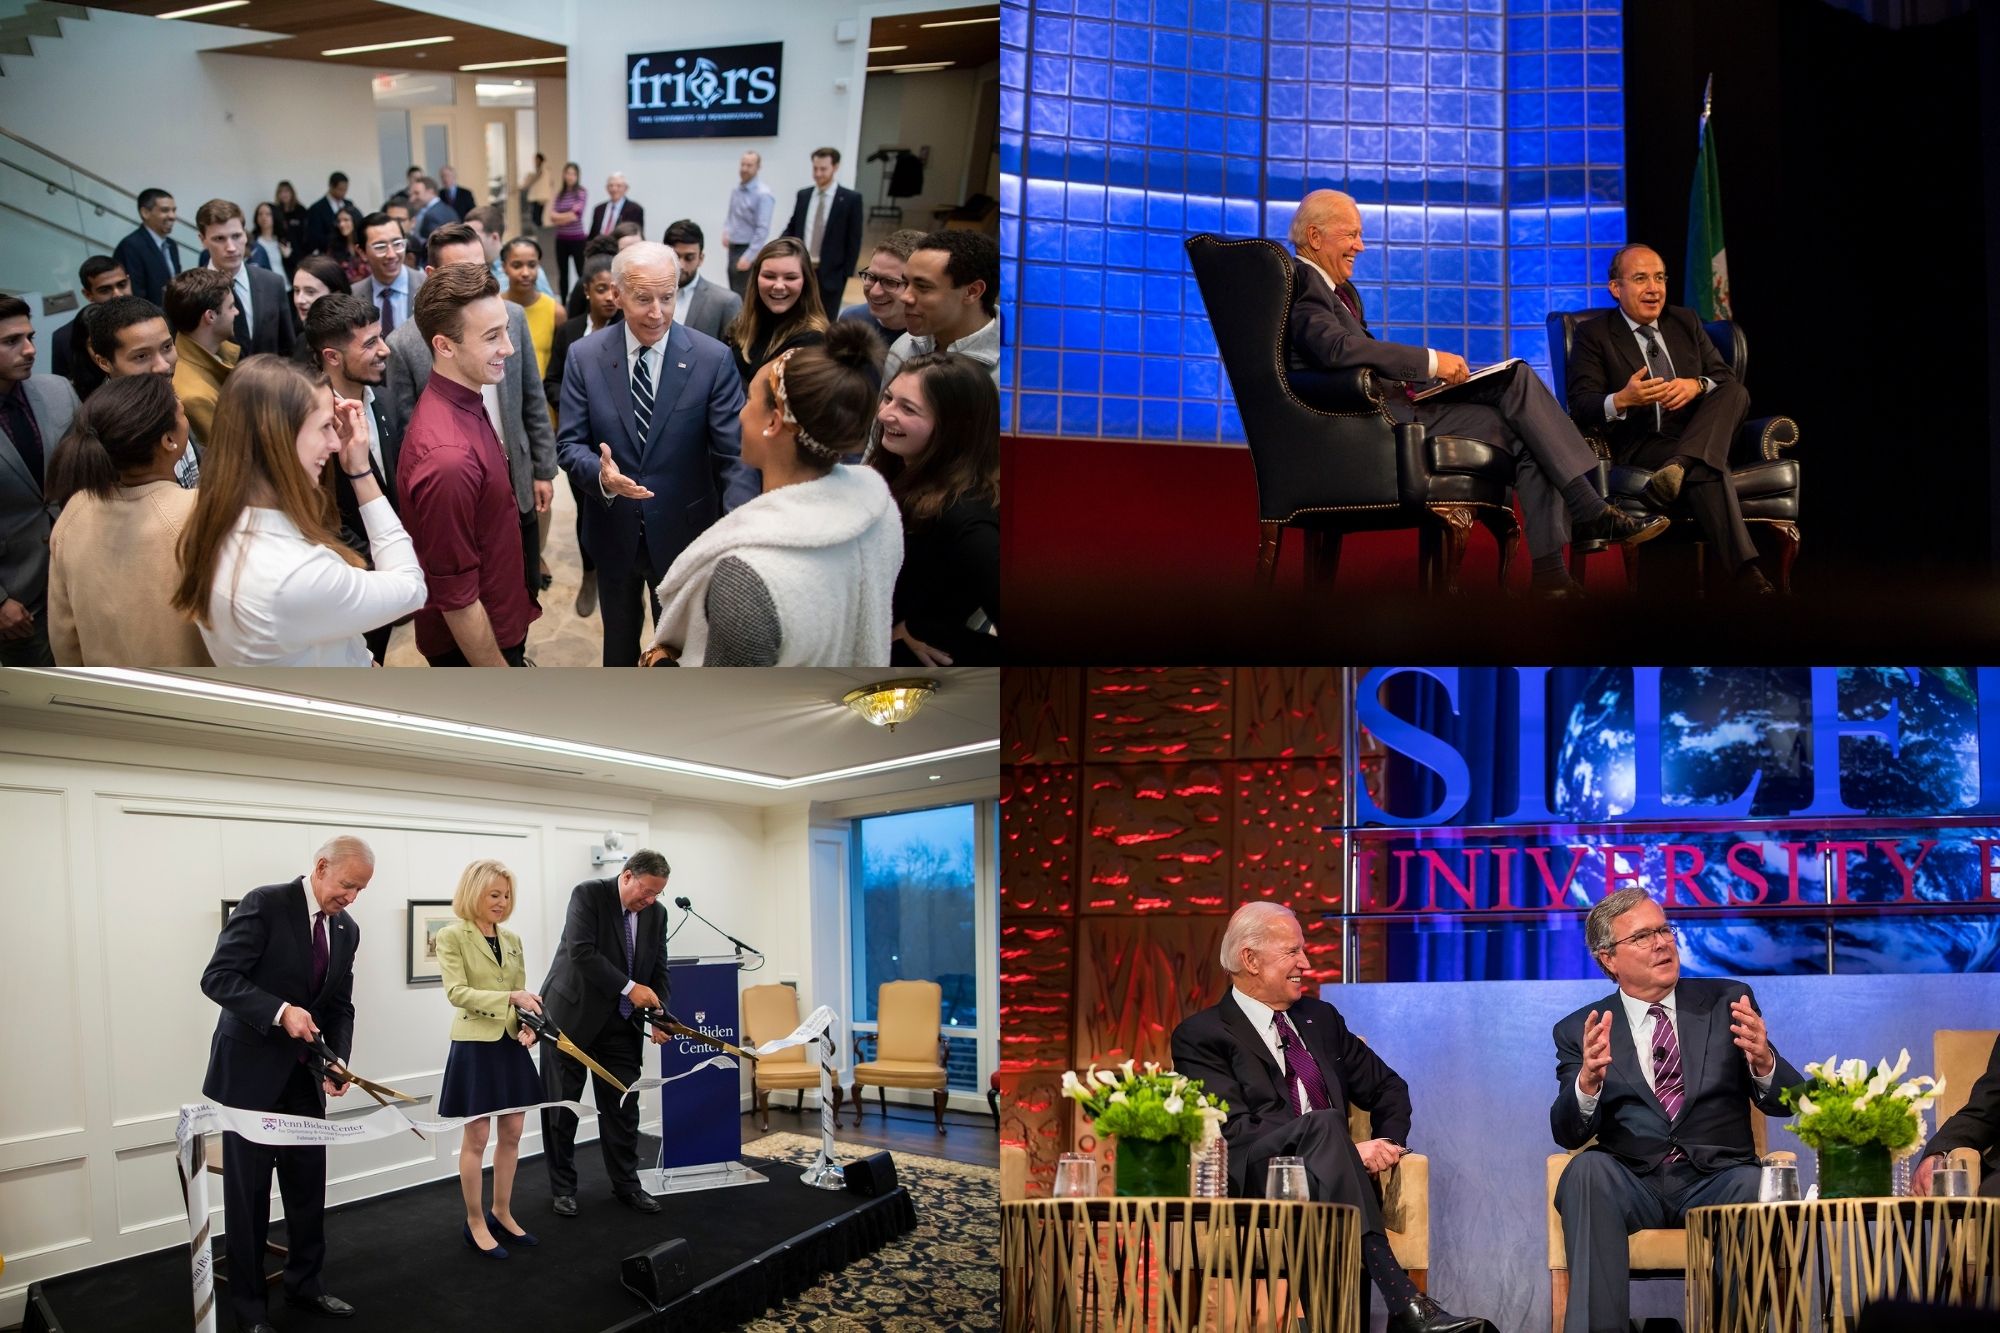 Clockwise from top left, Joe Biden engaging with Penn students, Biden on stage in discussion with Felipe Calderón, Joe Biden on stage with Jeb Bush during the Silfen Forum, and Biden, Amy Gutmann and David Cohen at a ribbon cutting ceremony for the Penn Biden Center.